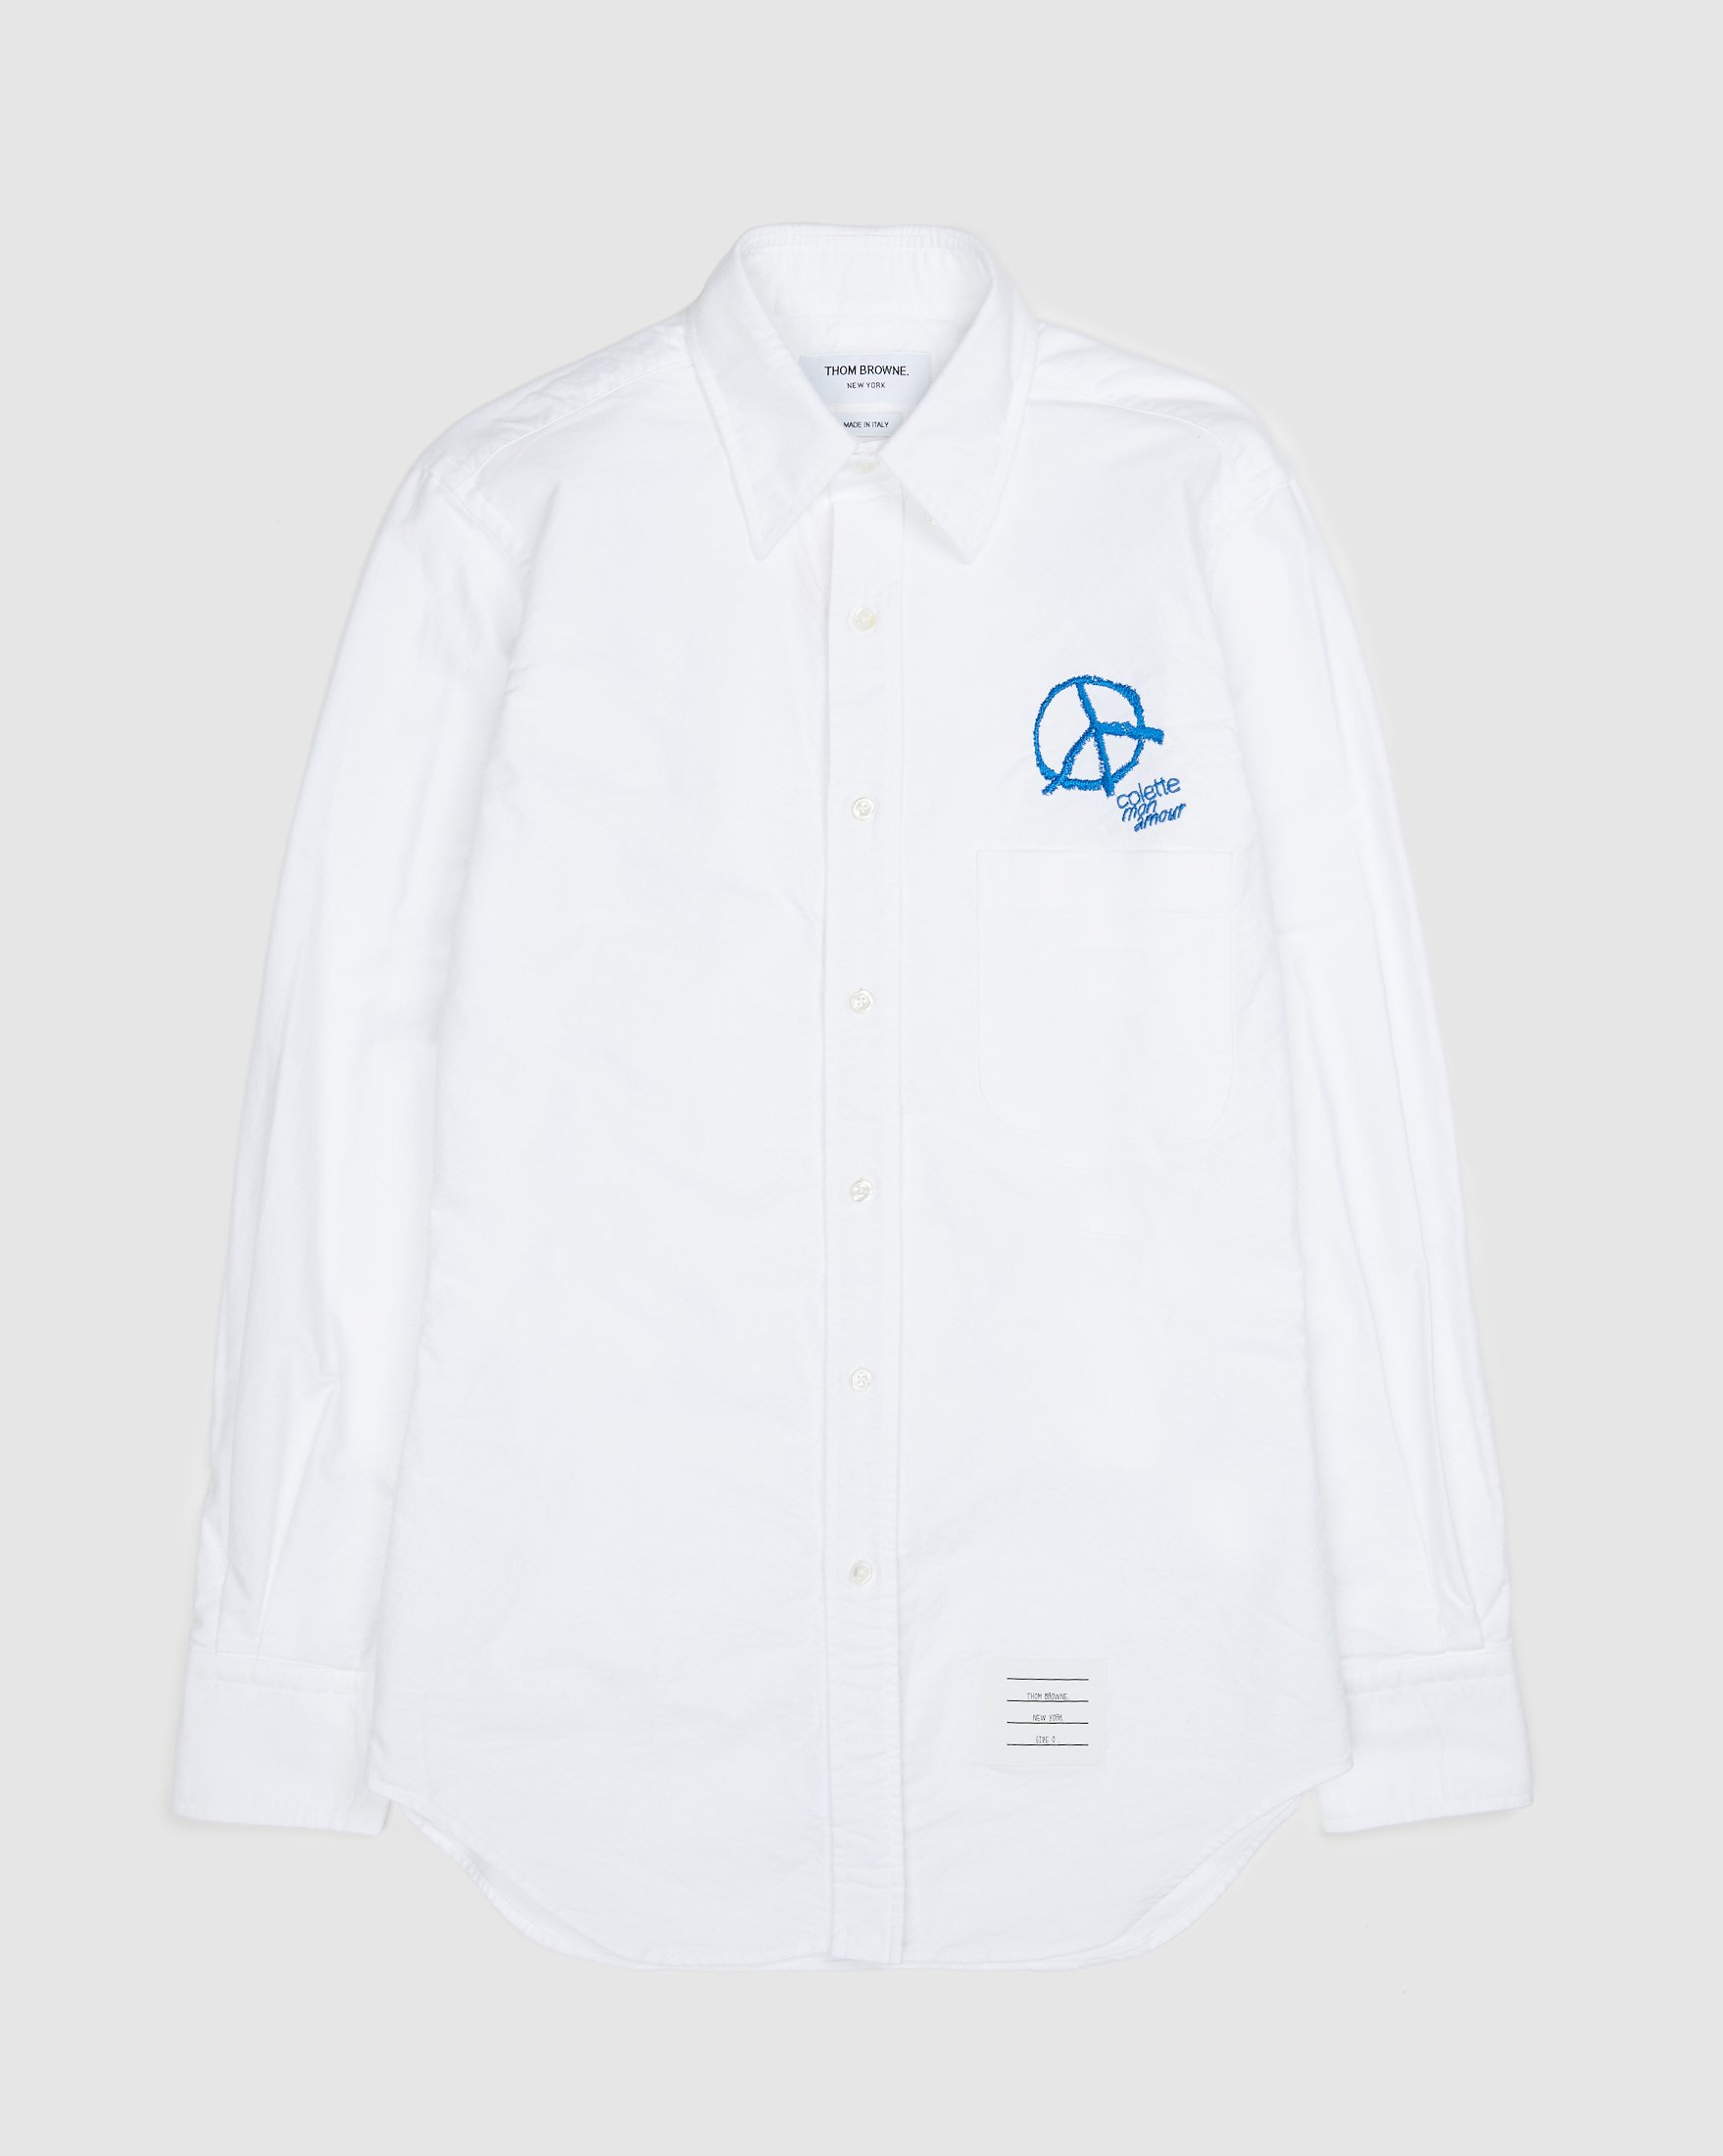 Colette Mon Amour x Thom Browne - White Peace Classic Shirt - Clothing - White - Image 1